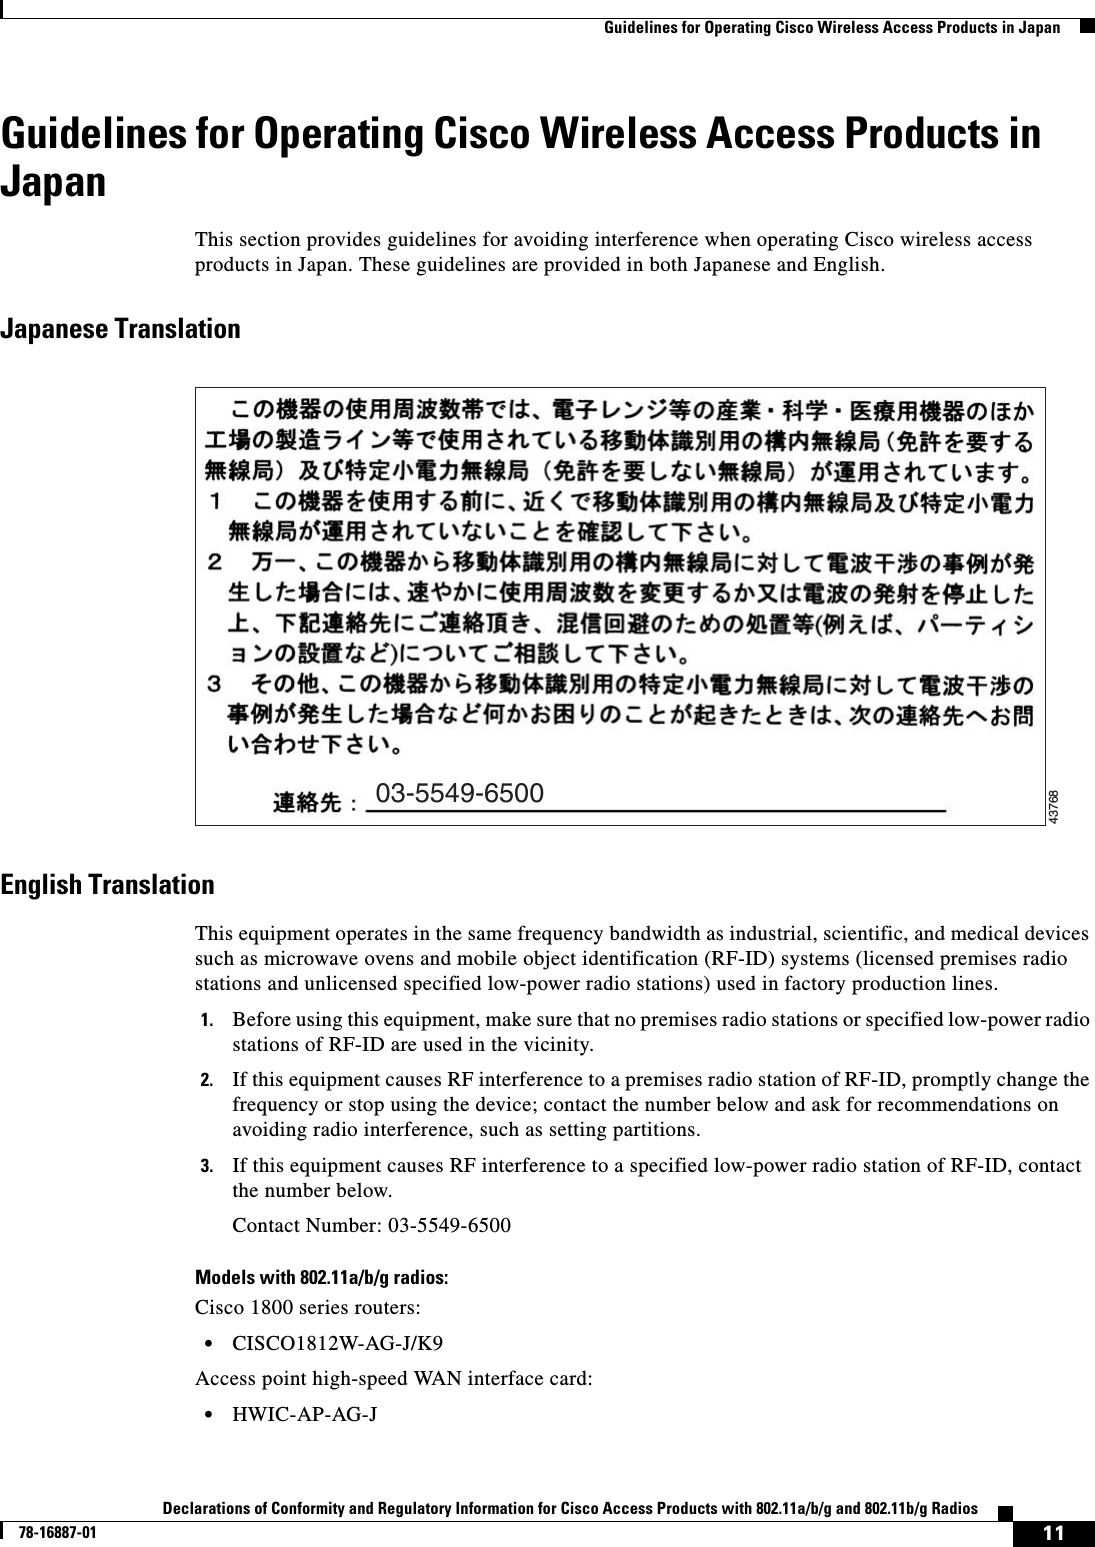  11Declarations of Conformity and Regulatory Information for Cisco Access Products with 802.11a/b/g and 802.11b/g Radios78-16887-01   Guidelines for Operating Cisco Wireless Access Products in JapanGuidelines for Operating Cisco Wireless Access Products in JapanThis section provides guidelines for avoiding interference when operating Cisco wireless access products in Japan. These guidelines are provided in both Japanese and English.Japanese TranslationEnglish TranslationThis equipment operates in the same frequency bandwidth as industrial, scientific, and medical devices such as microwave ovens and mobile object identification (RF-ID) systems (licensed premises radio stations and unlicensed specified low-power radio stations) used in factory production lines.1. Before using this equipment, make sure that no premises radio stations or specified low-power radio stations of RF-ID are used in the vicinity.2. If this equipment causes RF interference to a premises radio station of RF-ID, promptly change the frequency or stop using the device; contact the number below and ask for recommendations on avoiding radio interference, such as setting partitions.3. If this equipment causes RF interference to a specified low-power radio station of RF-ID, contact the number below.Contact Number: 03-5549-6500Models with 802.11a/b/g radios:Cisco 1800 series routers:•CISCO1812W-AG-J/K9Access point high-speed WAN interface card:•HWIC-AP-AG-J03-5549-650043768